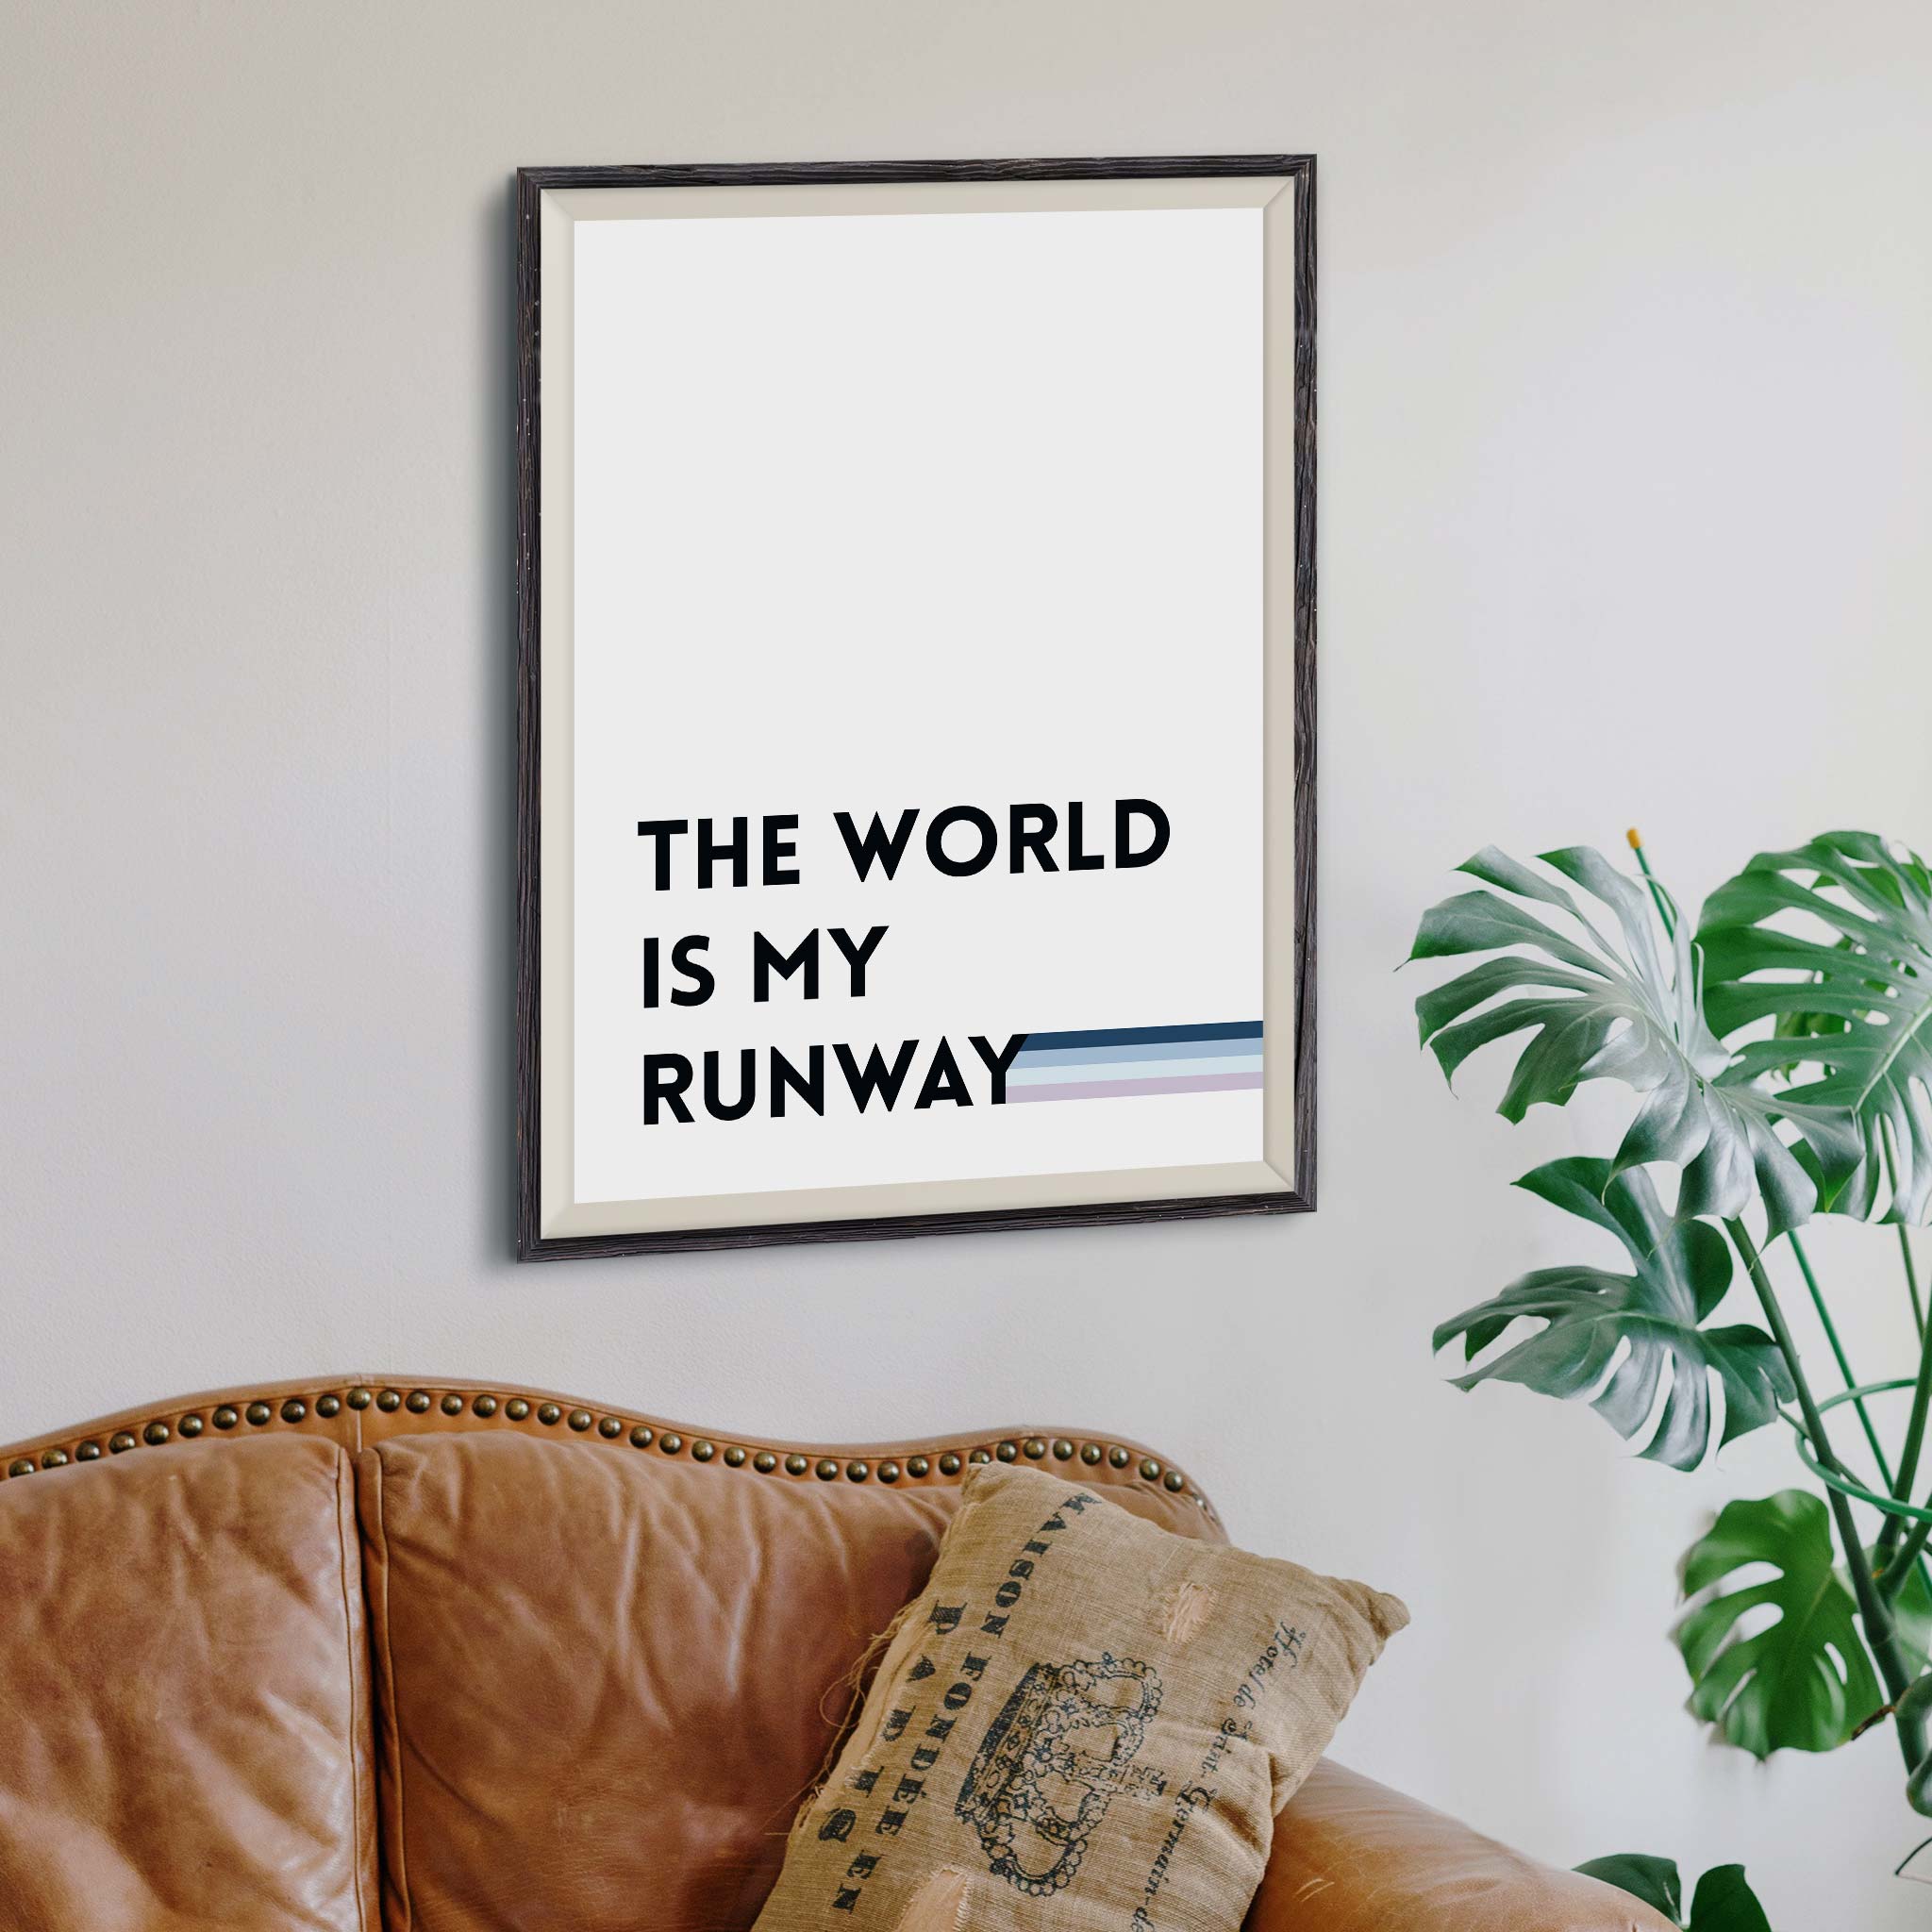 The world is my runway